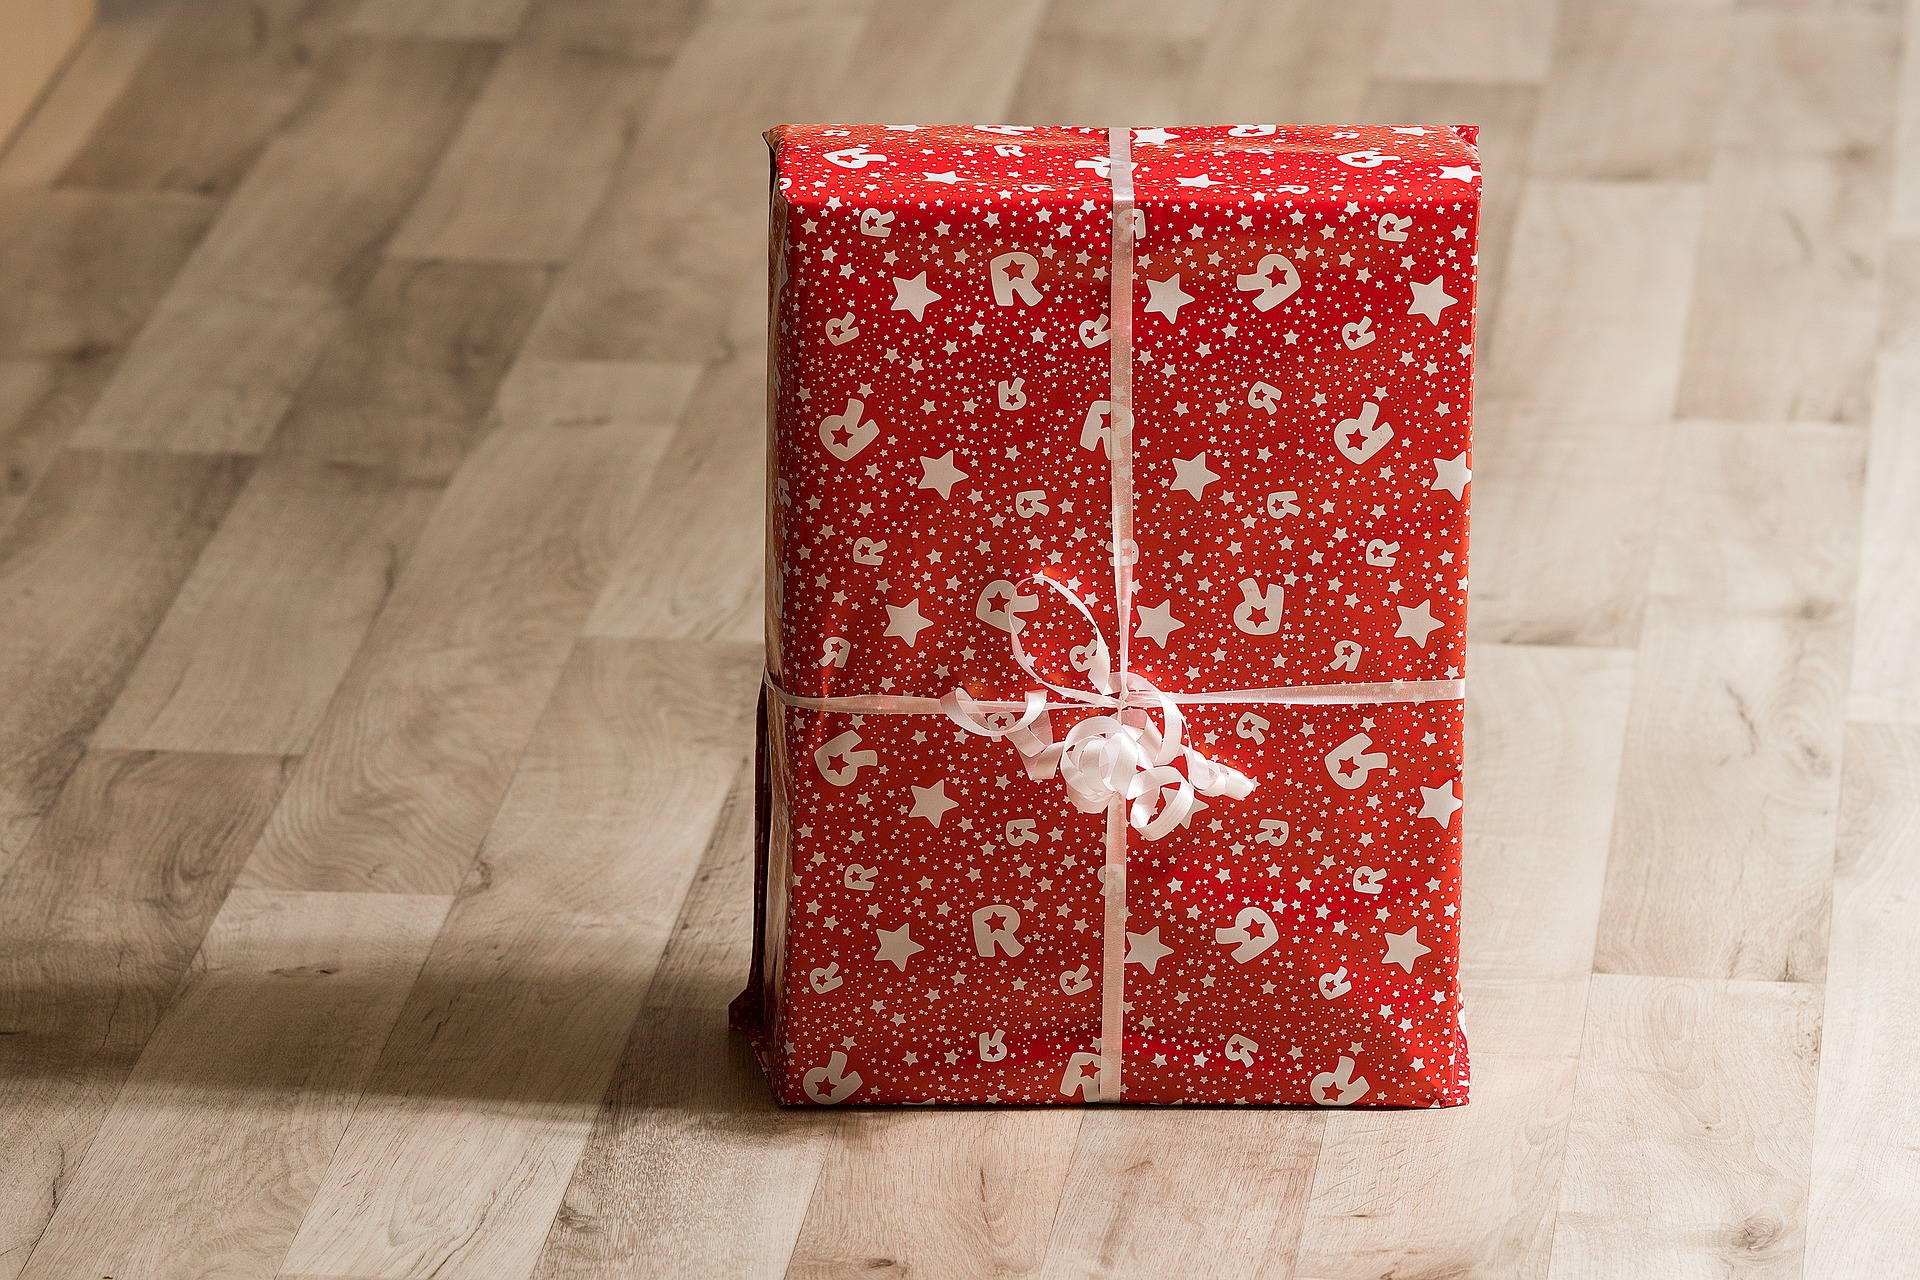 Have you bought Christmas presents for your tenants yet?